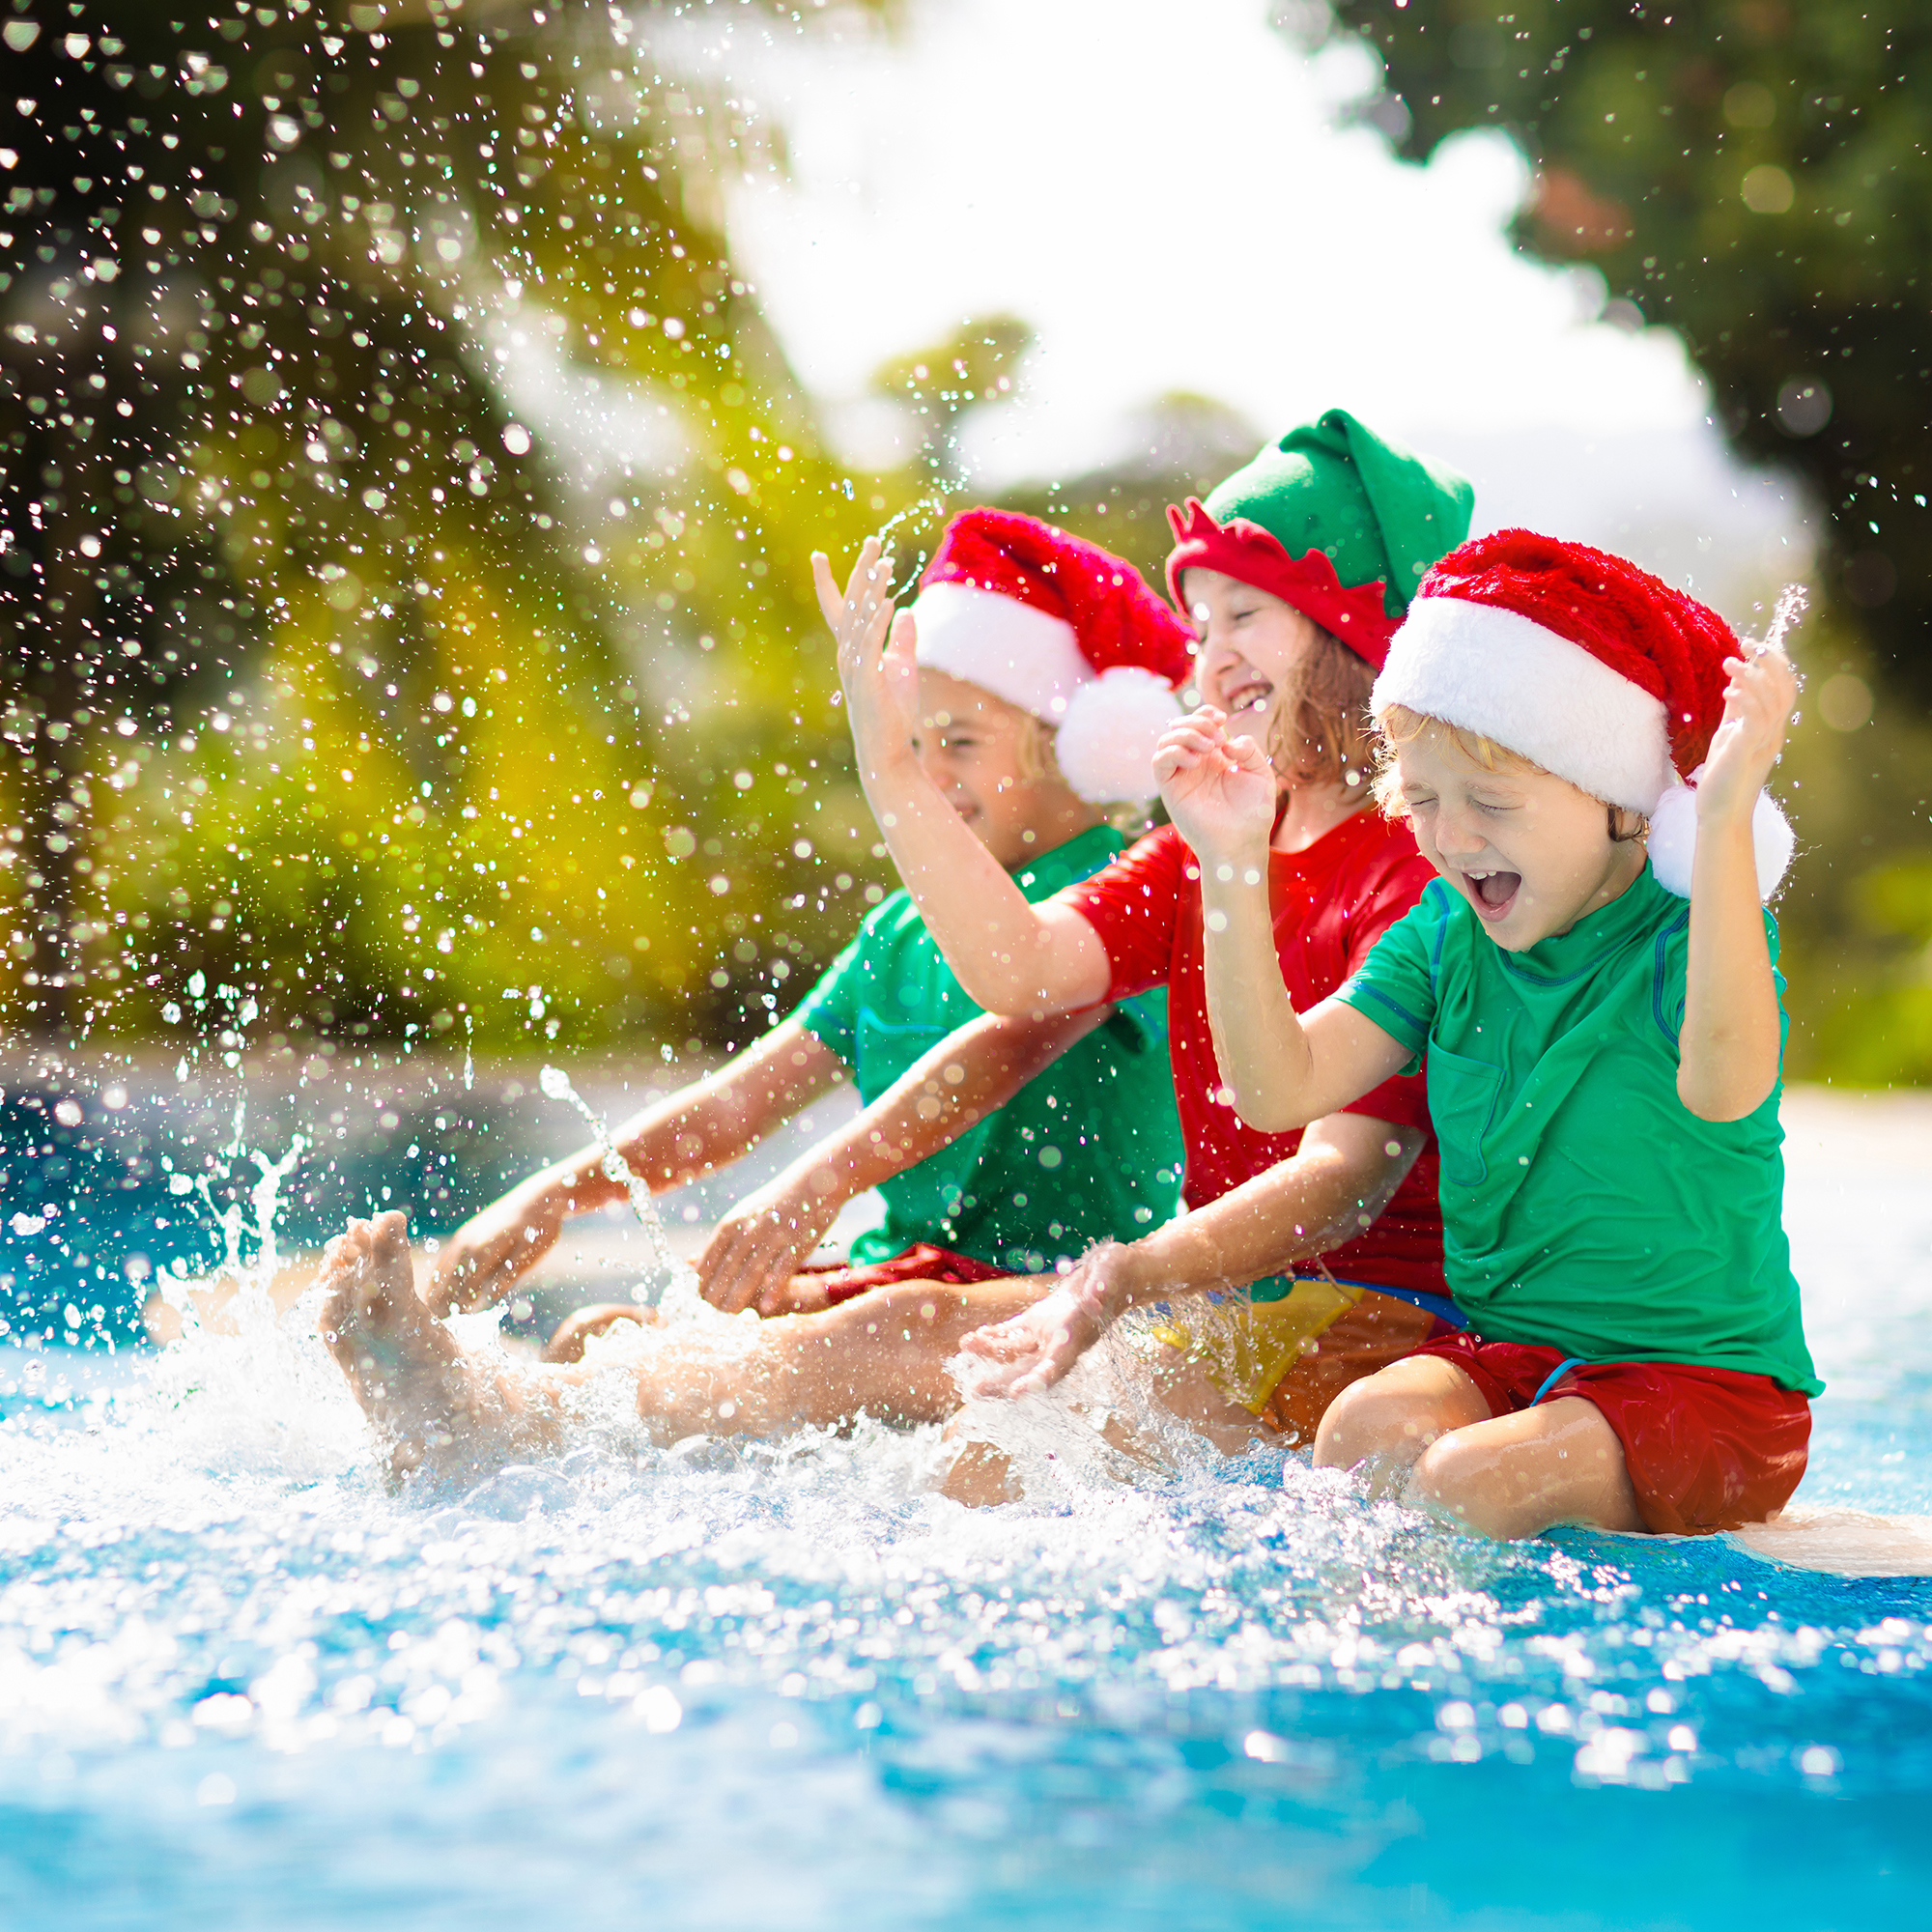 three kids dressed in green and red, wearing Santa and elf hats, kicking water from the edge of a swimming pool